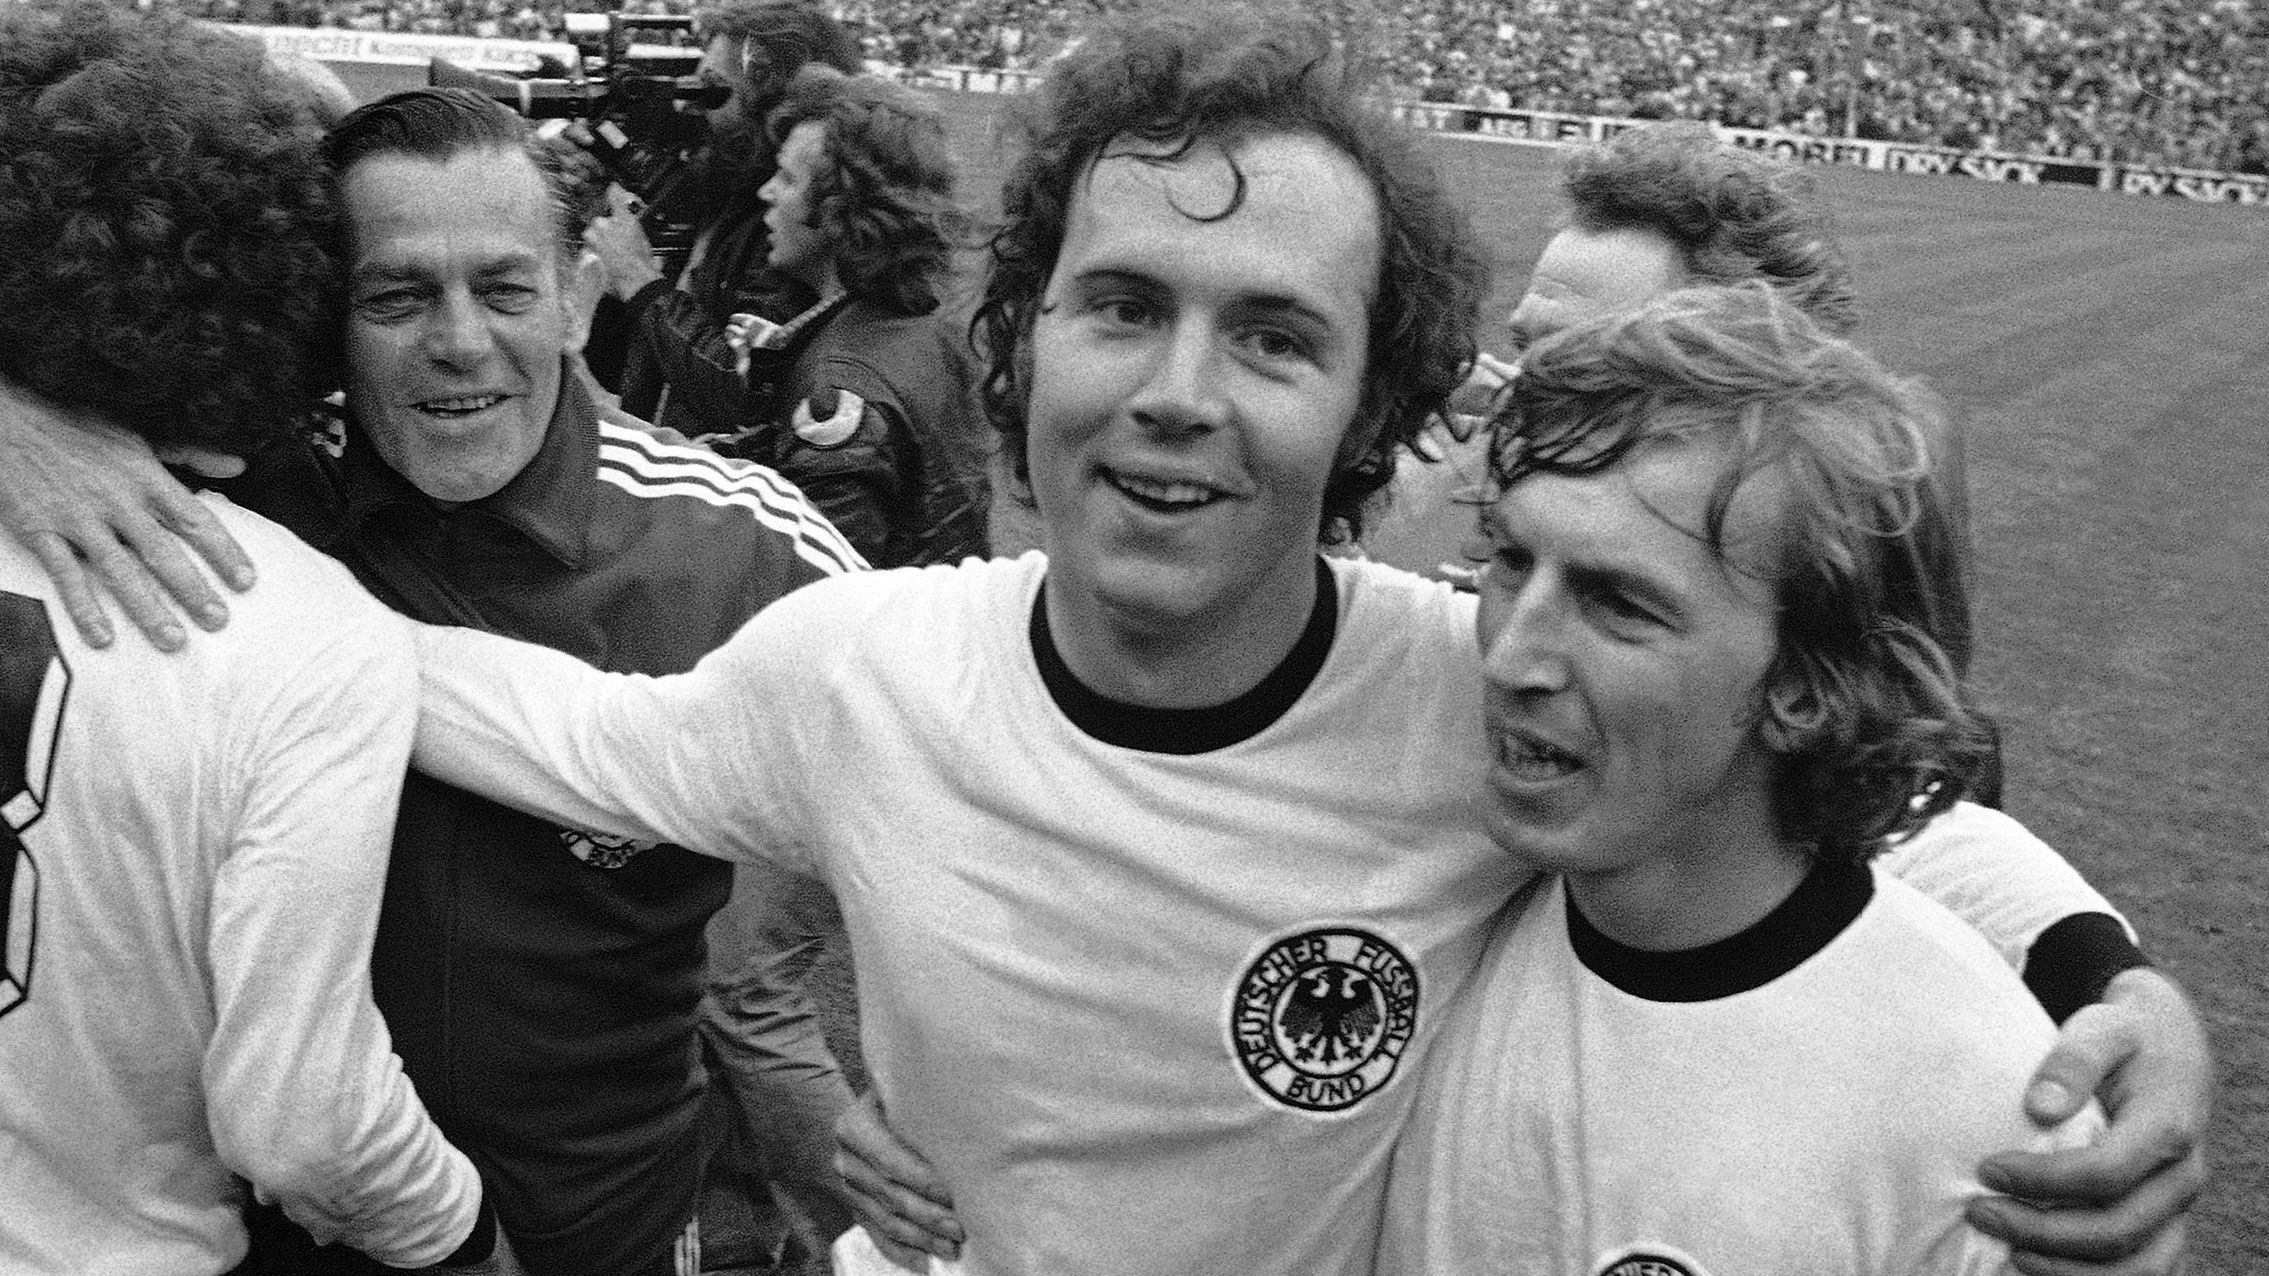 West German national soccer team captain Franz Beckenbauer, second from right, in 1974.